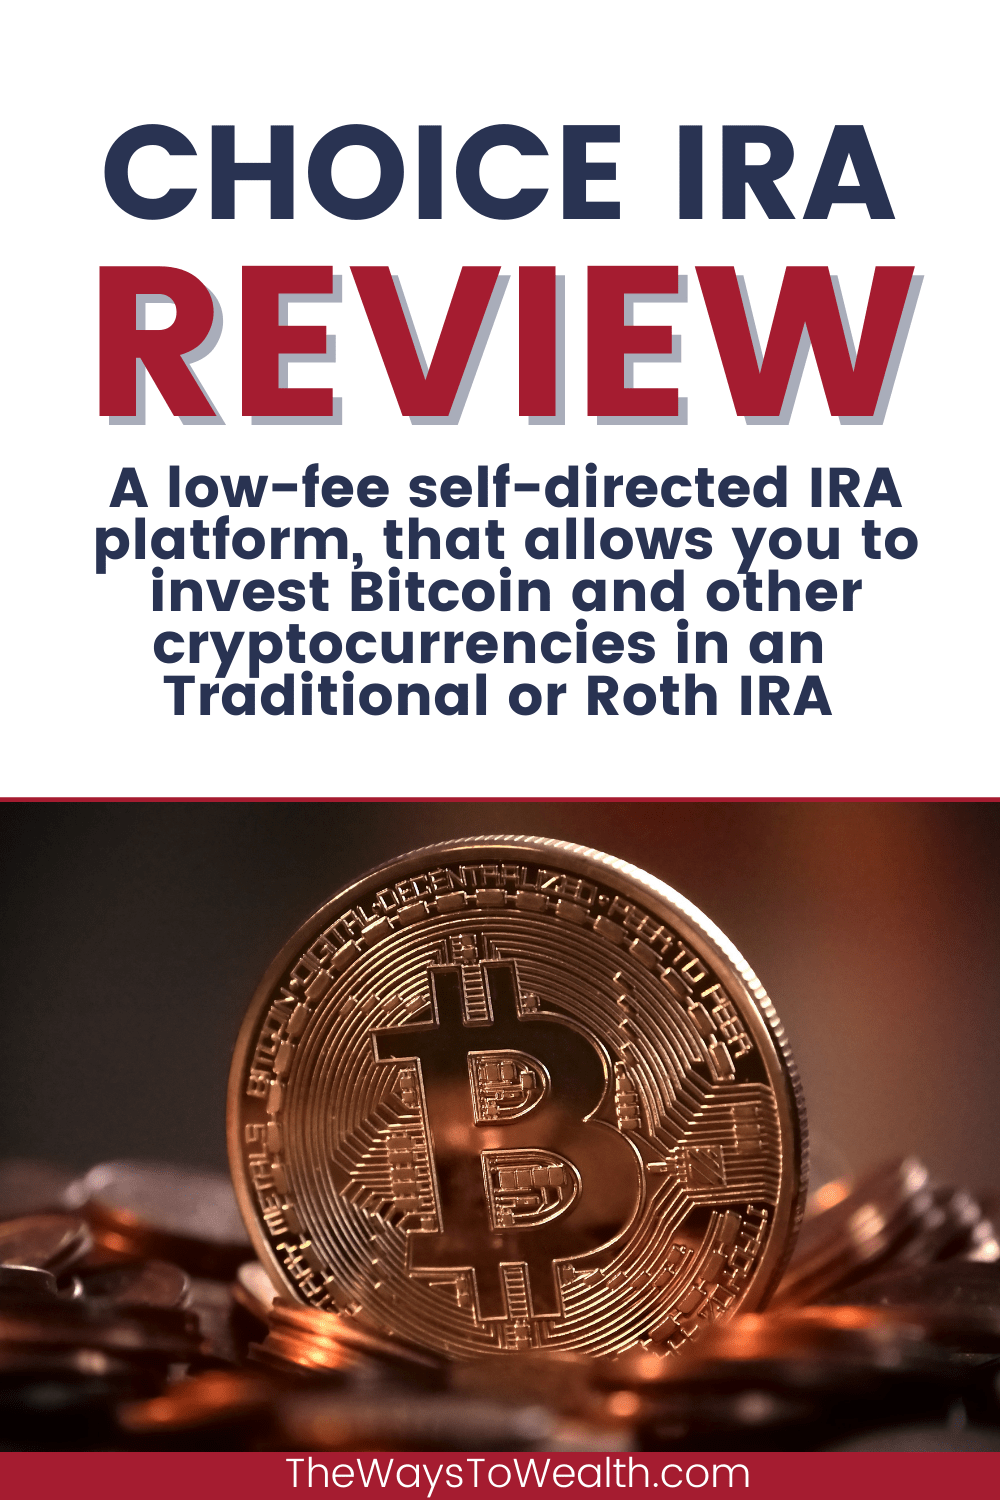 choice-ira-review-by-kingdom-trust-pros-cons-fees-2021